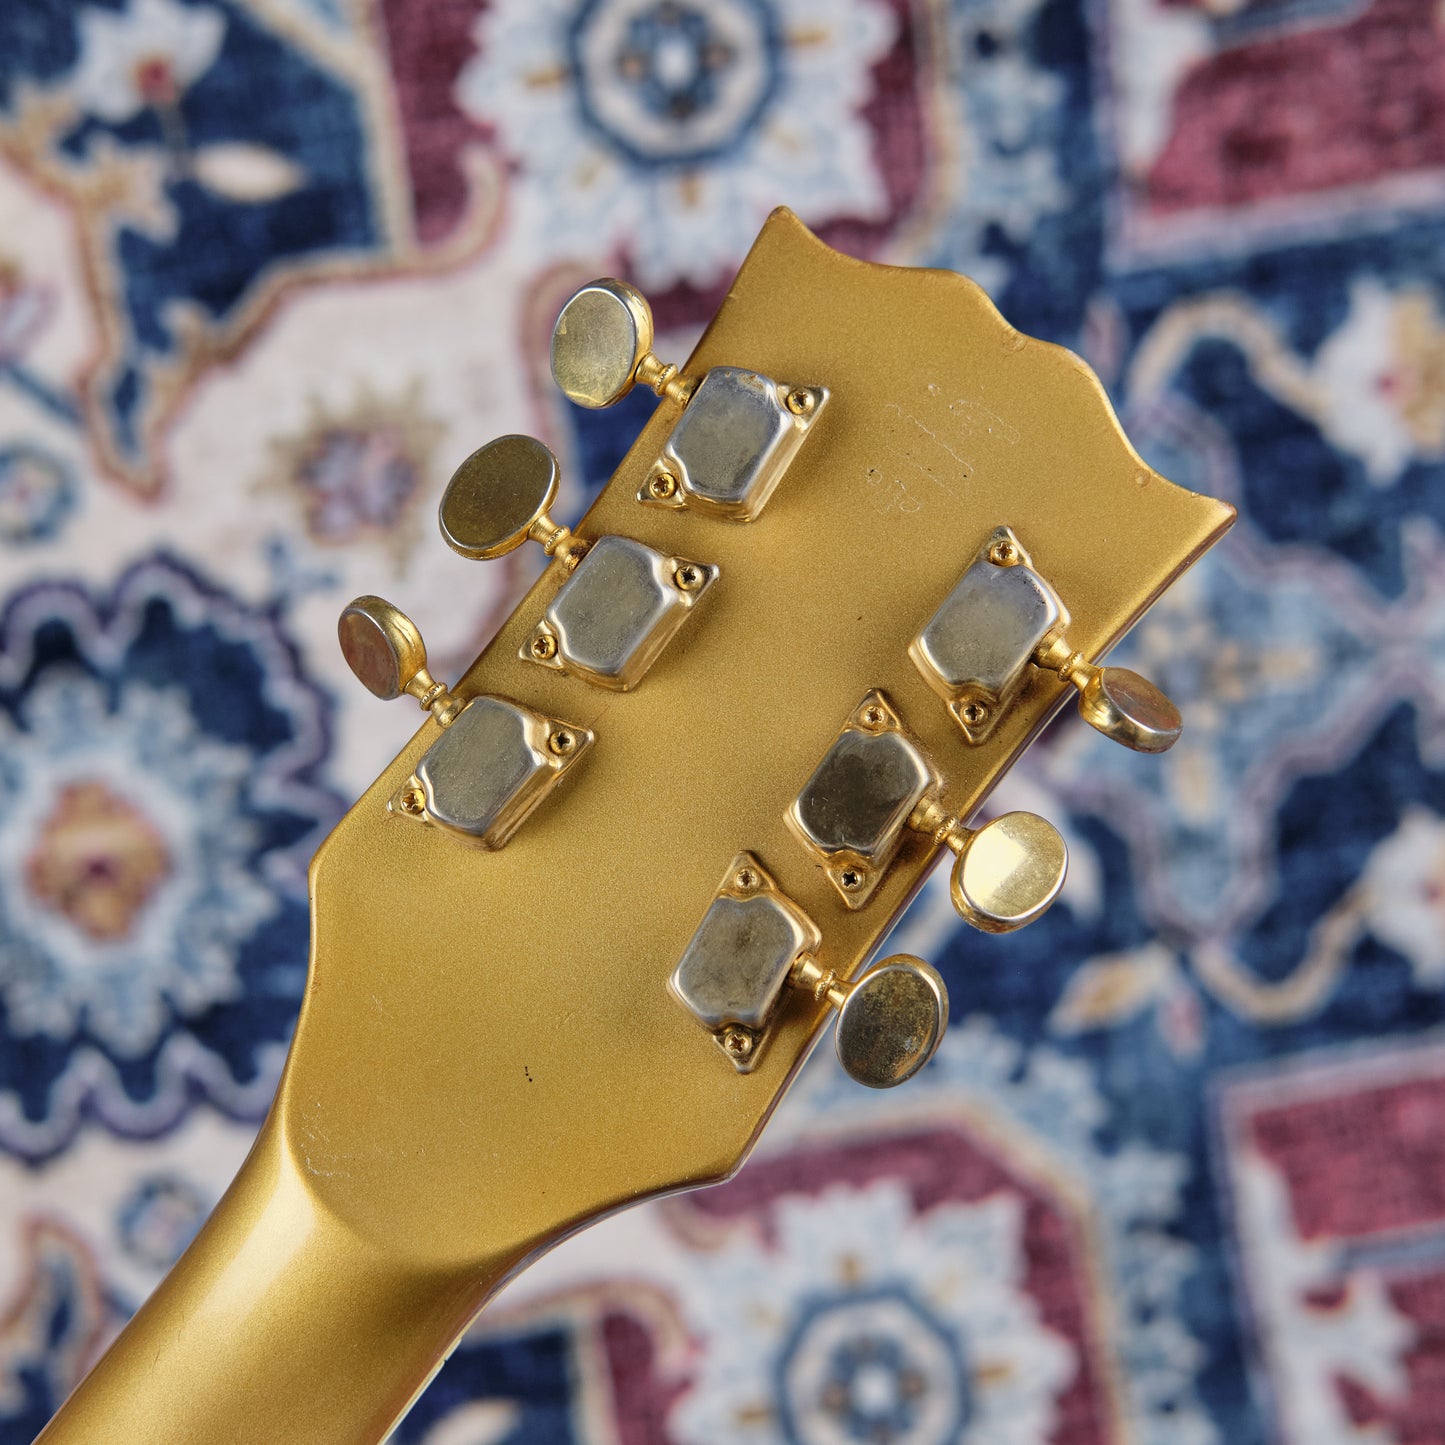 1970s Unknown Japanese Les Paul Copy Gold Top